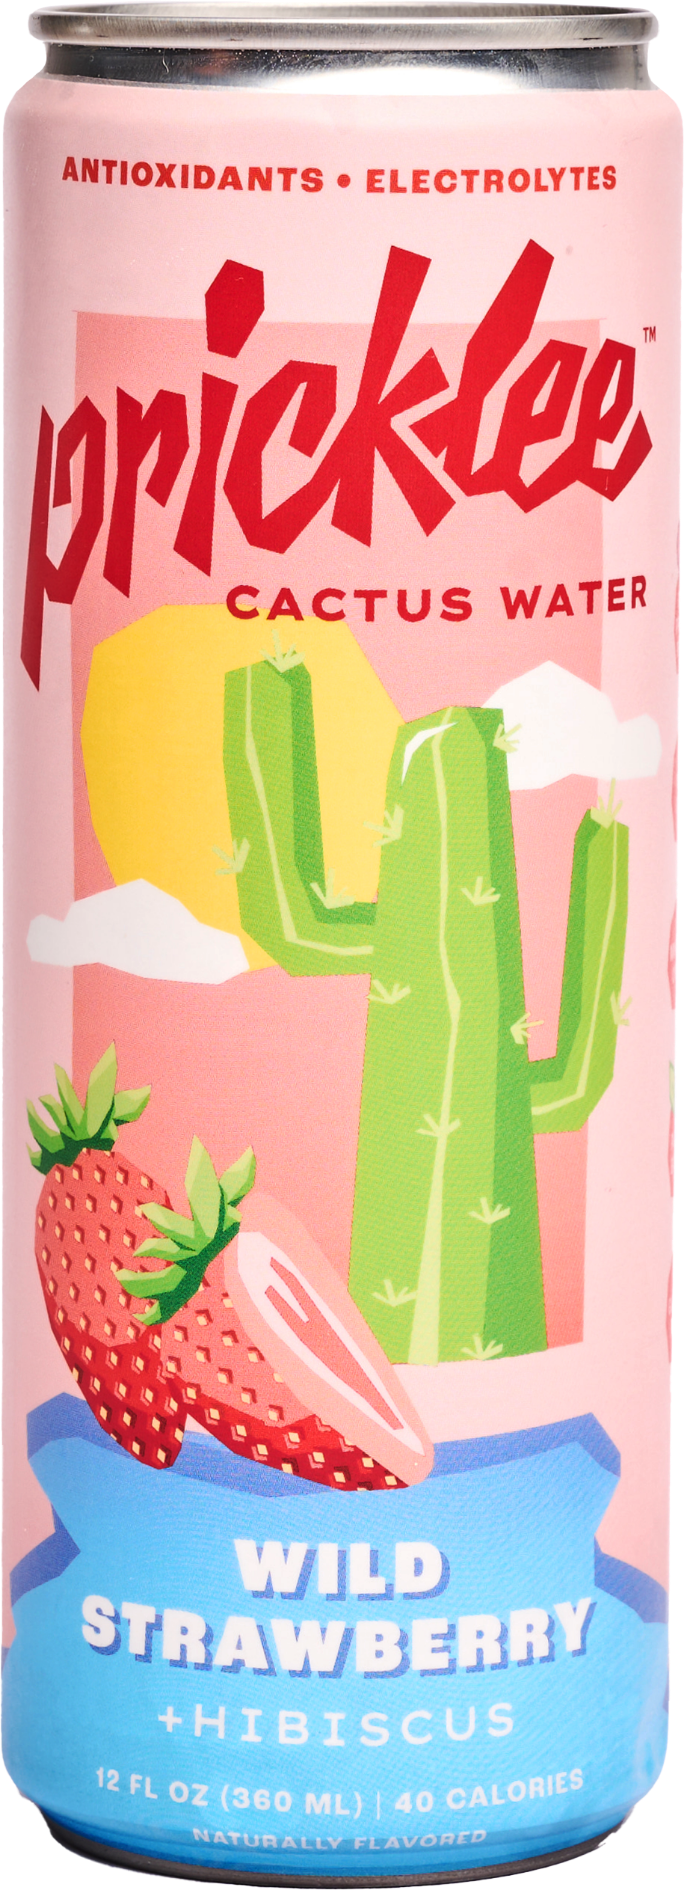 Strawberry Hibiscus by 🌵 Pricklee Cactus Water 🌵